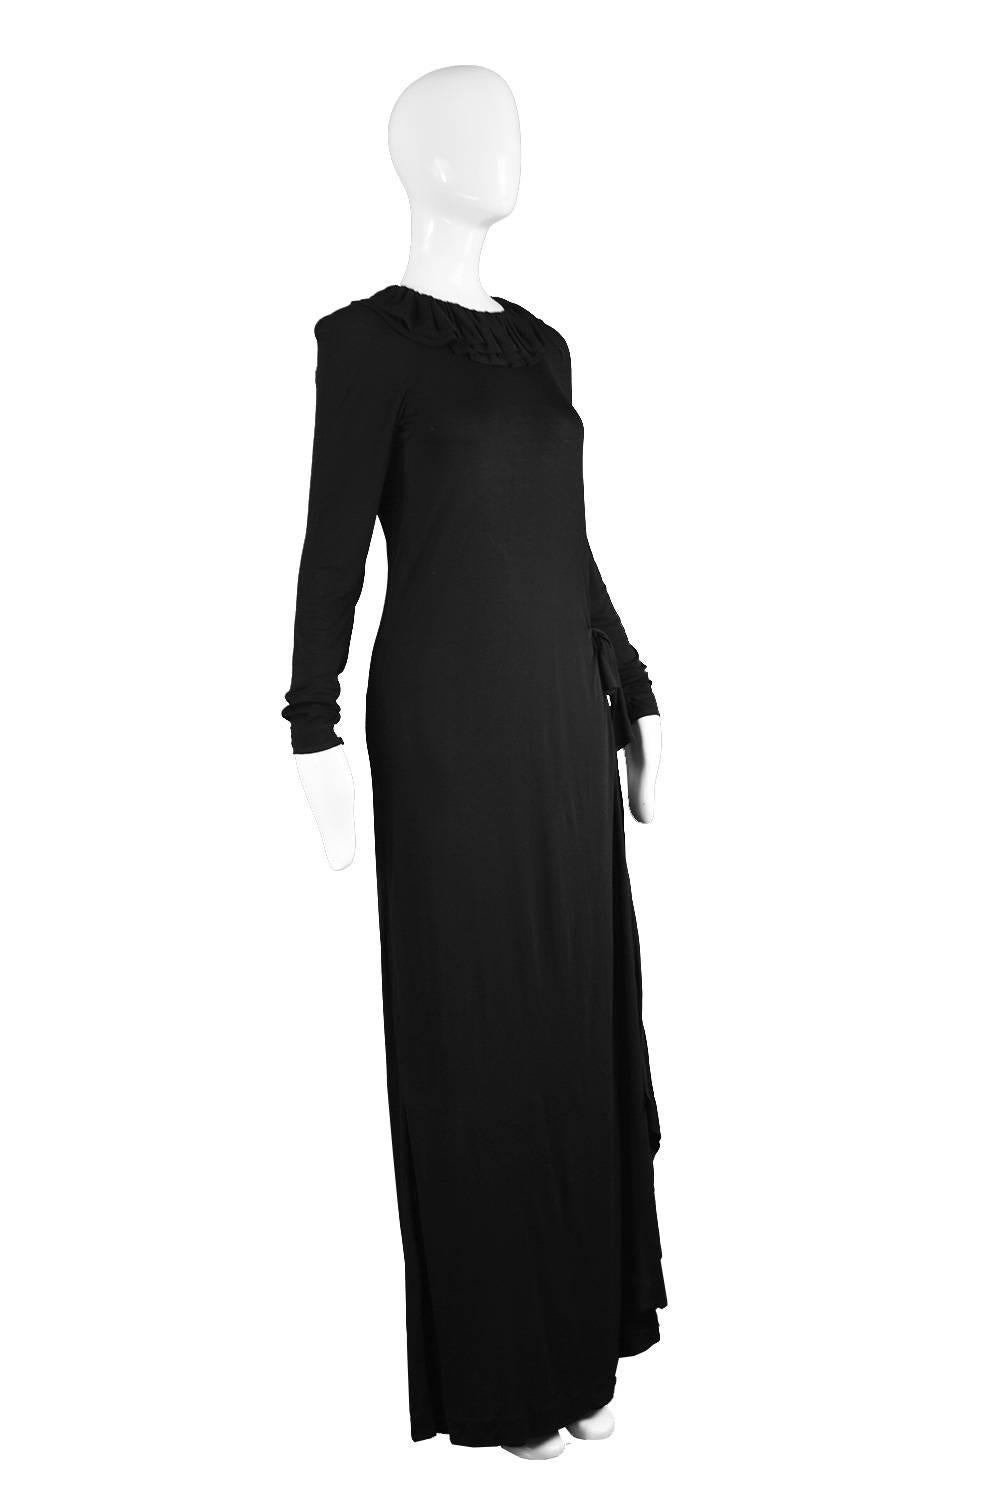 Jean Muir Black Draped Rayon Jersey Vintage Dress with Side Train, 1970s For Sale 2